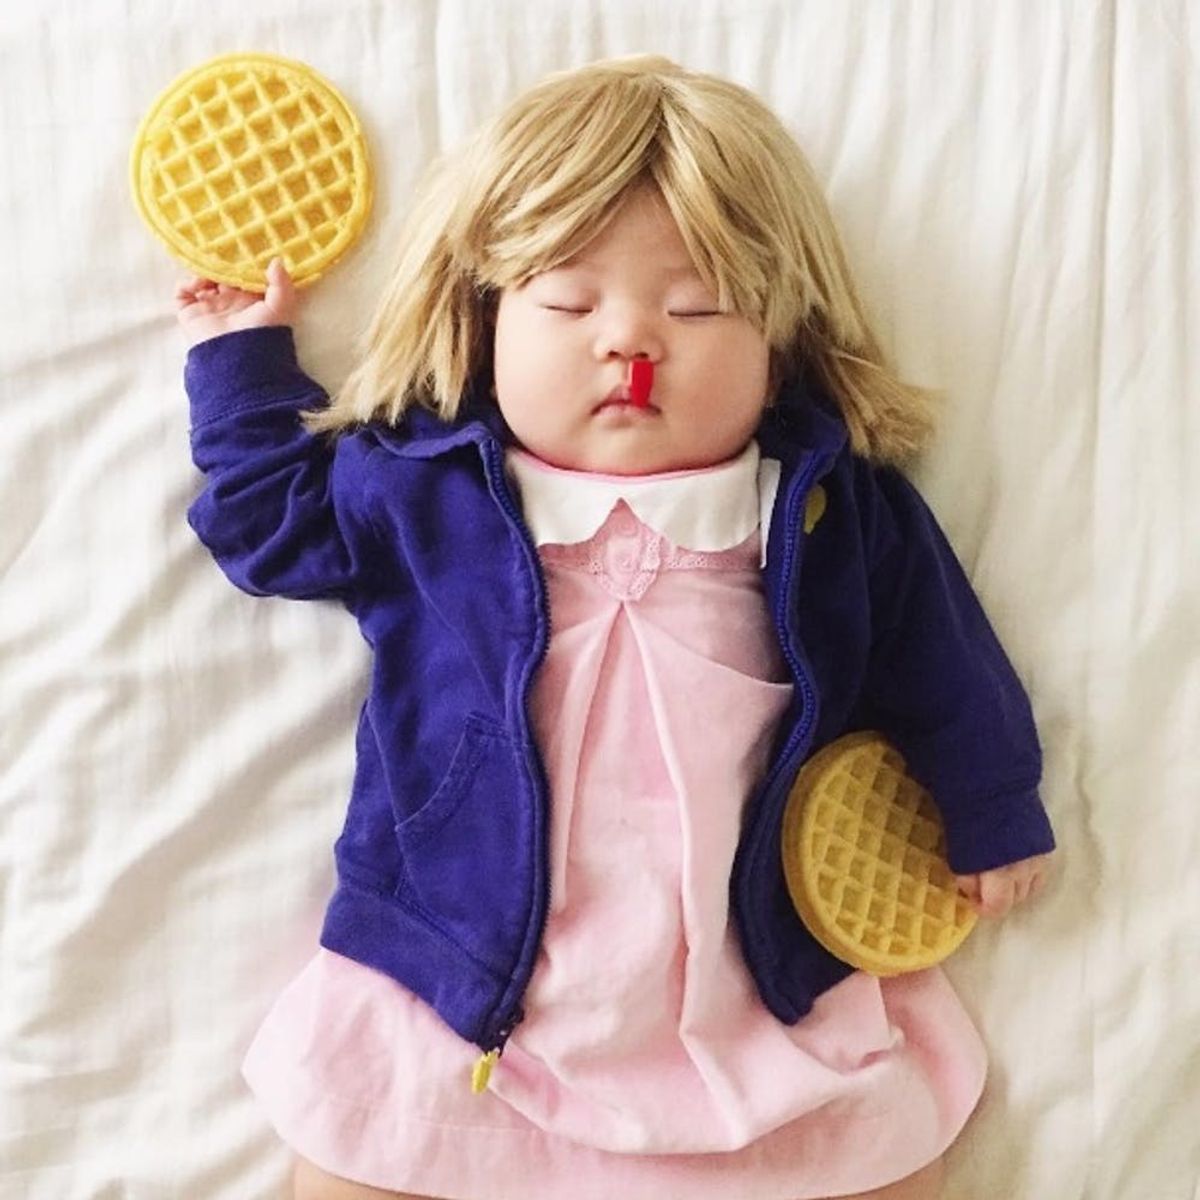 This Mom Dresses Her Napping Baby in the Most Amazing Costumes